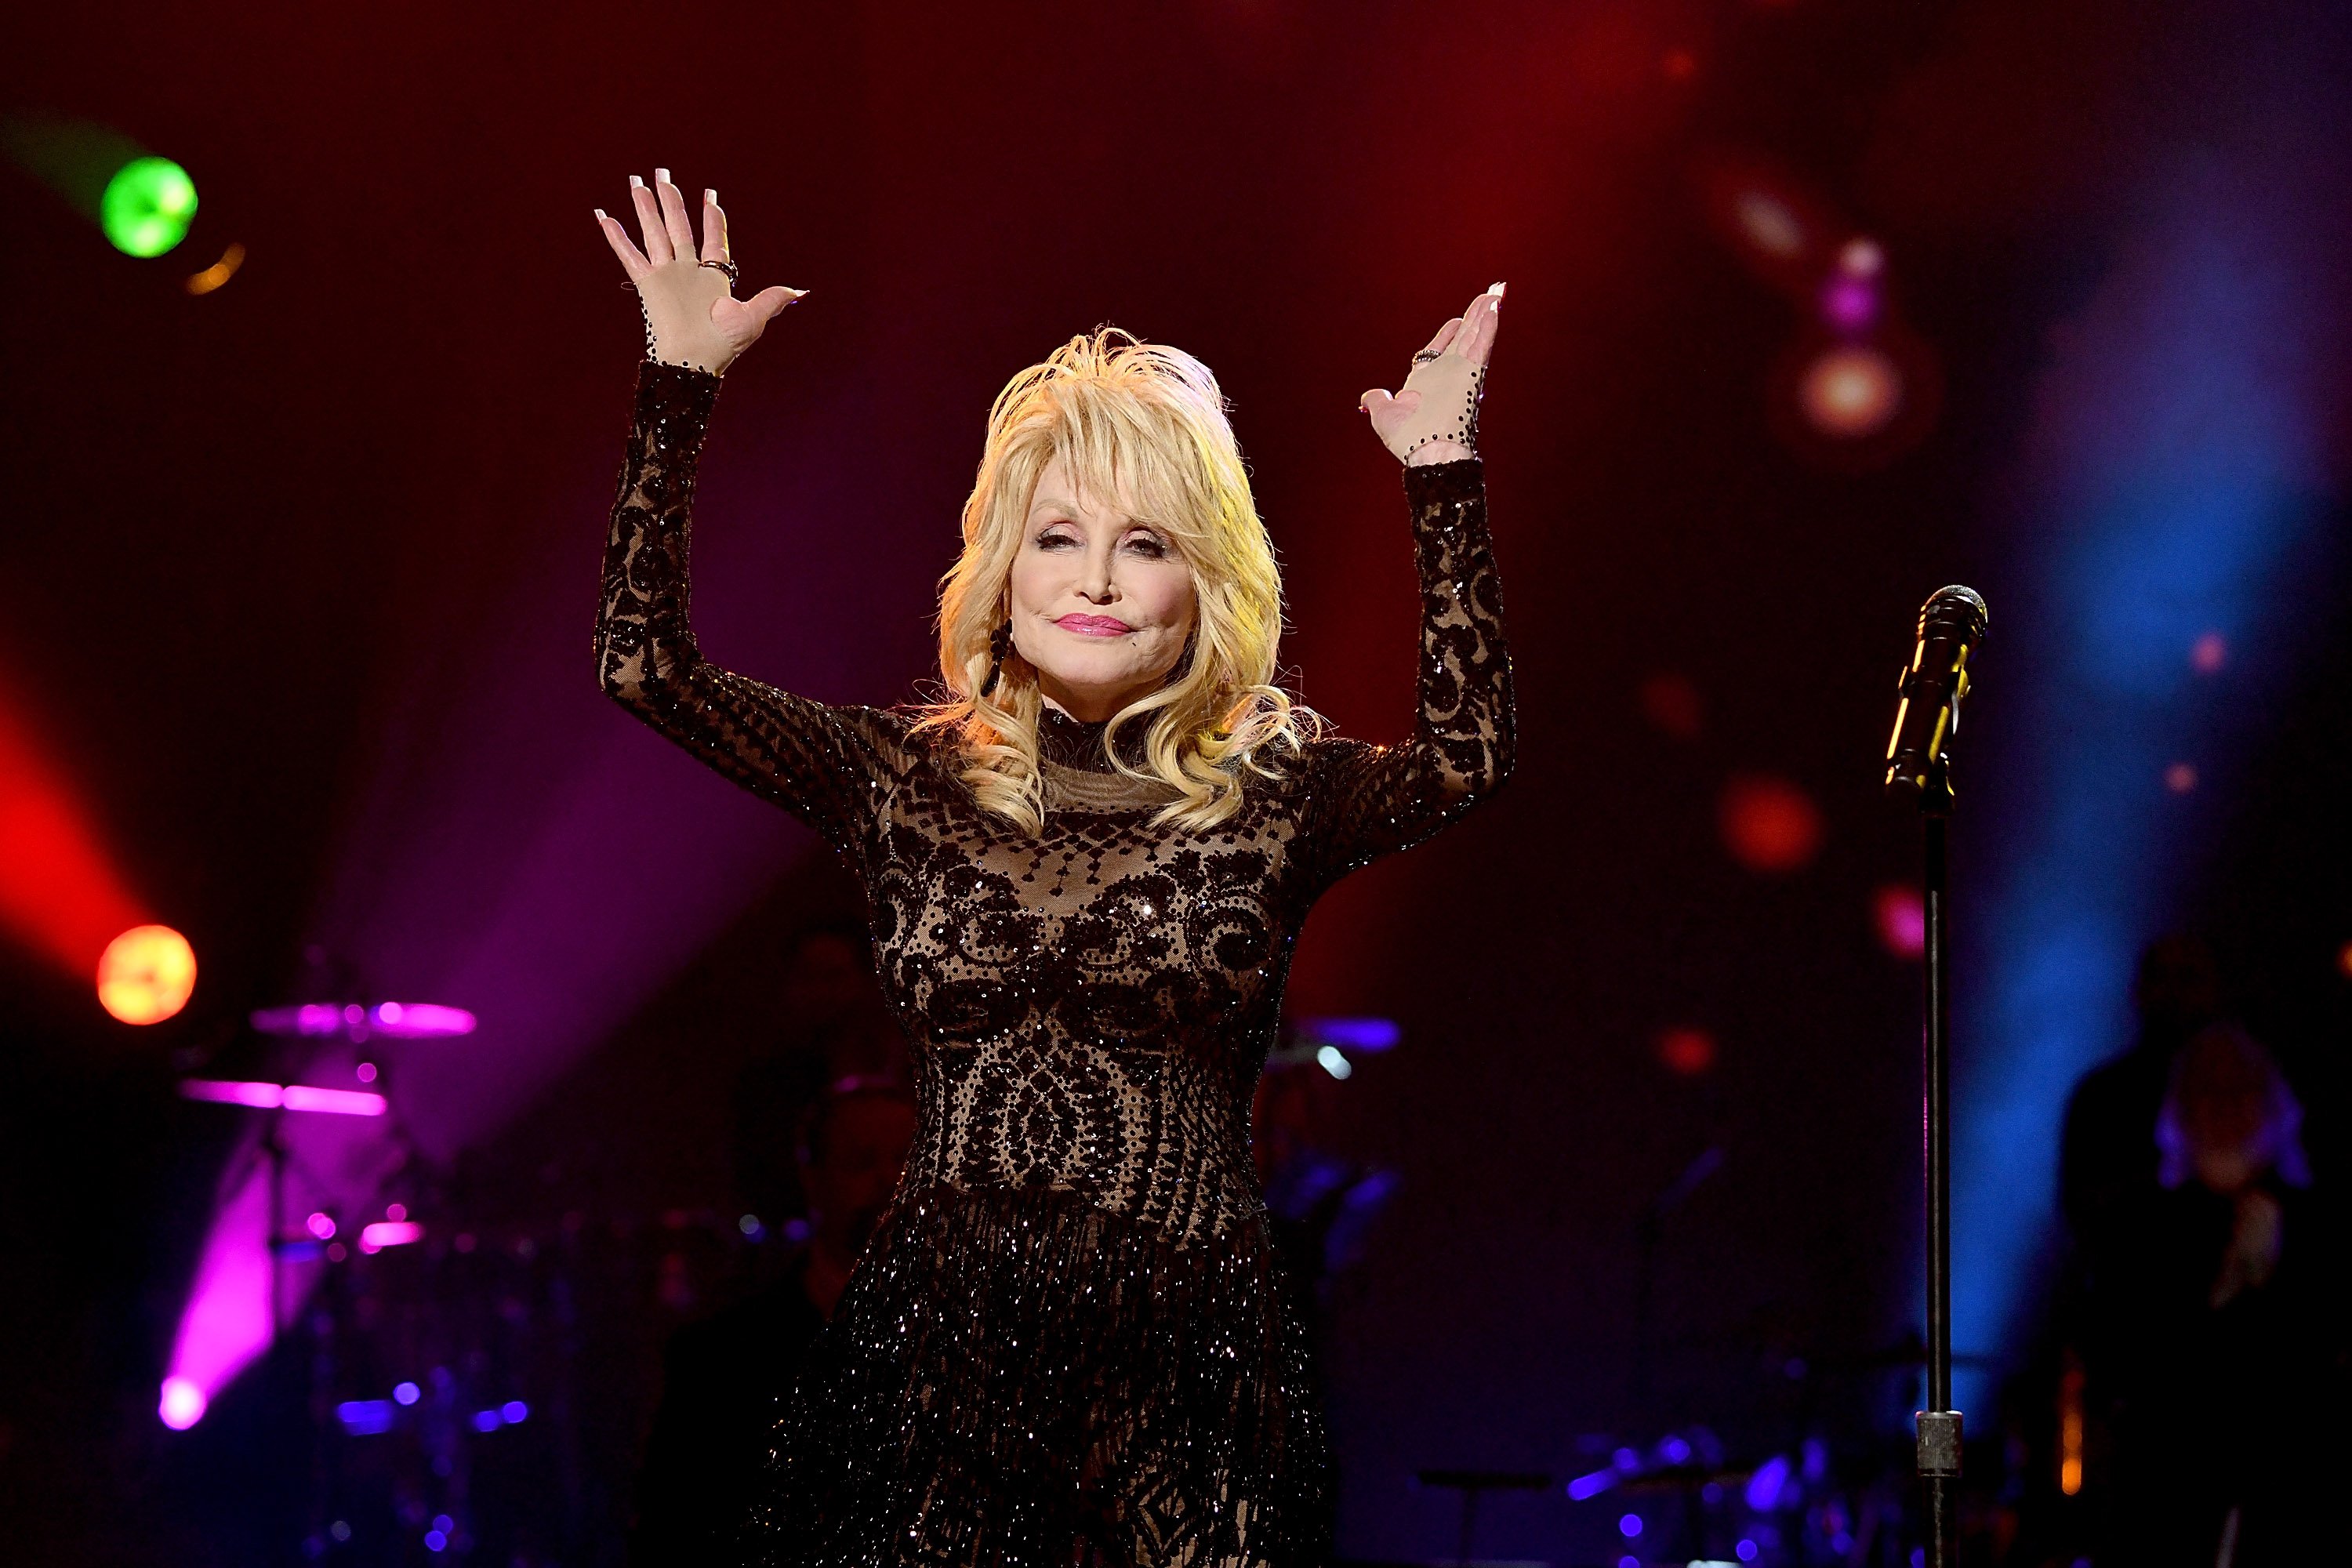 Dolly Parton performs onstage during MusiCares Person of the Year honoring Dolly Parton at the Los Angeles Convention Center on February 8, 2019